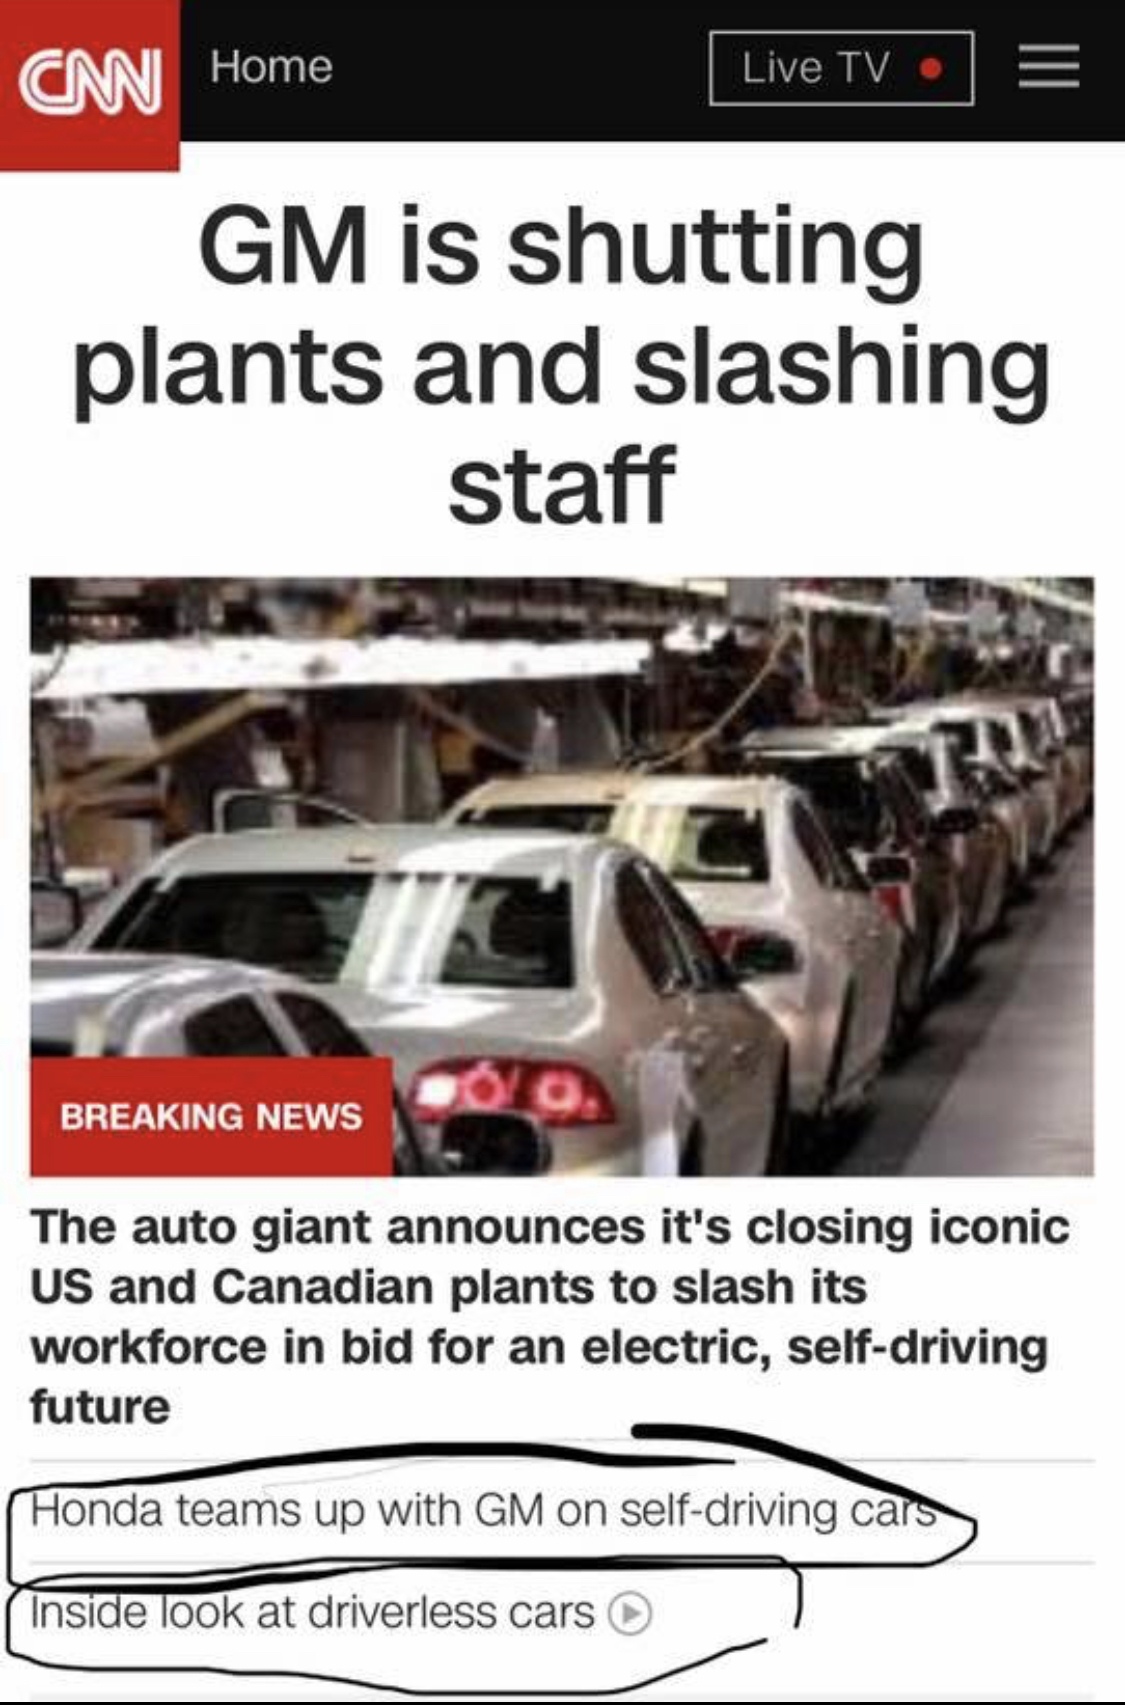 CNN: Auto giant announces closing iconic plants to slash workforce in bid for electric self driving future